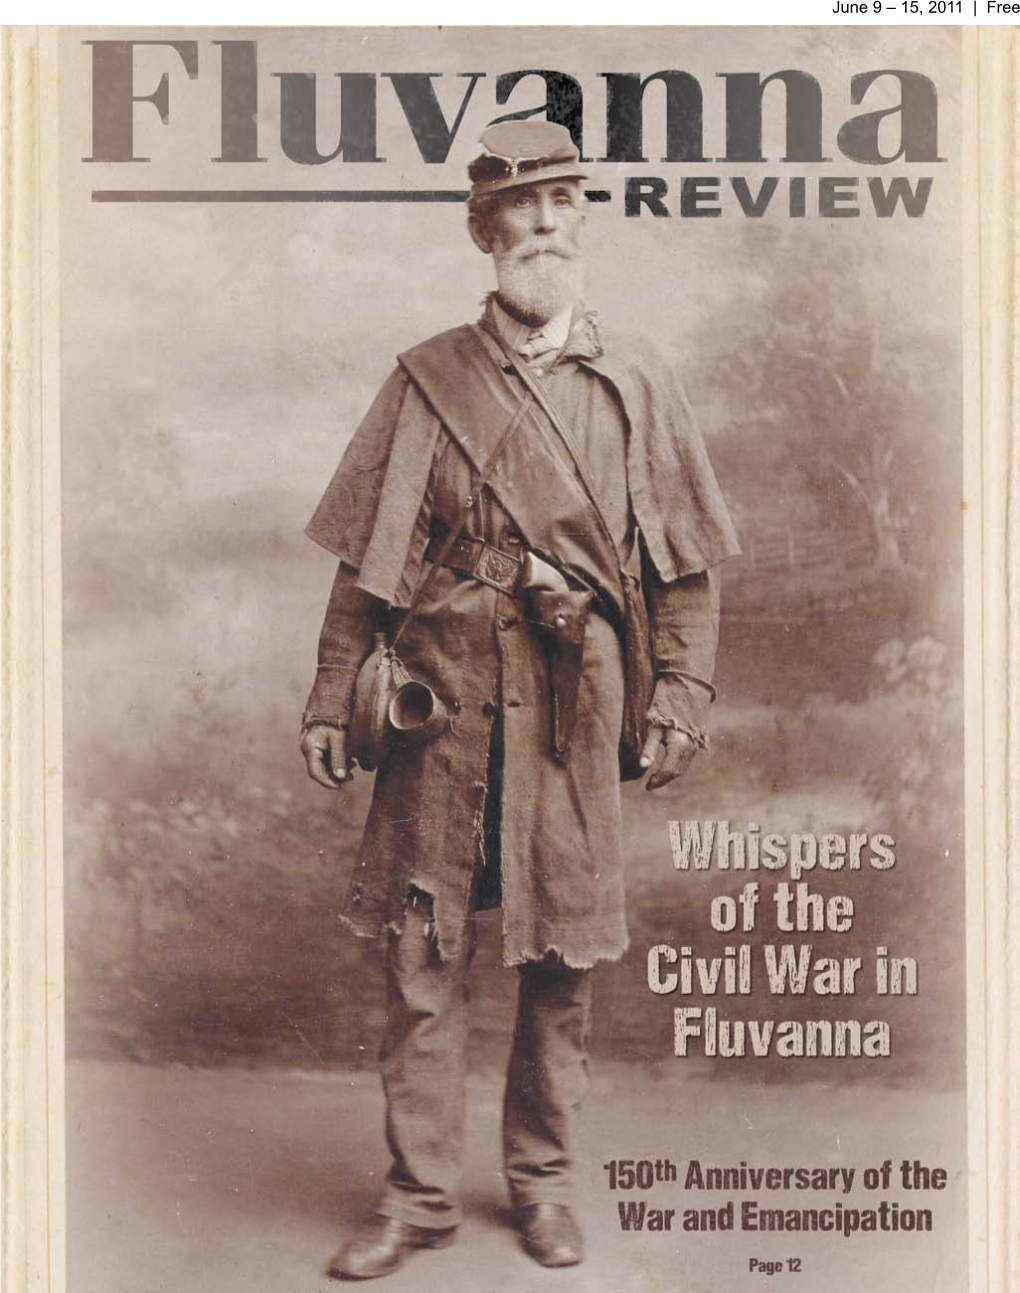 June 9 – 15, 2011 | Free June 9 – 15, 2011 • Volume 31, Issue 23 Fluvanna This Week in Review